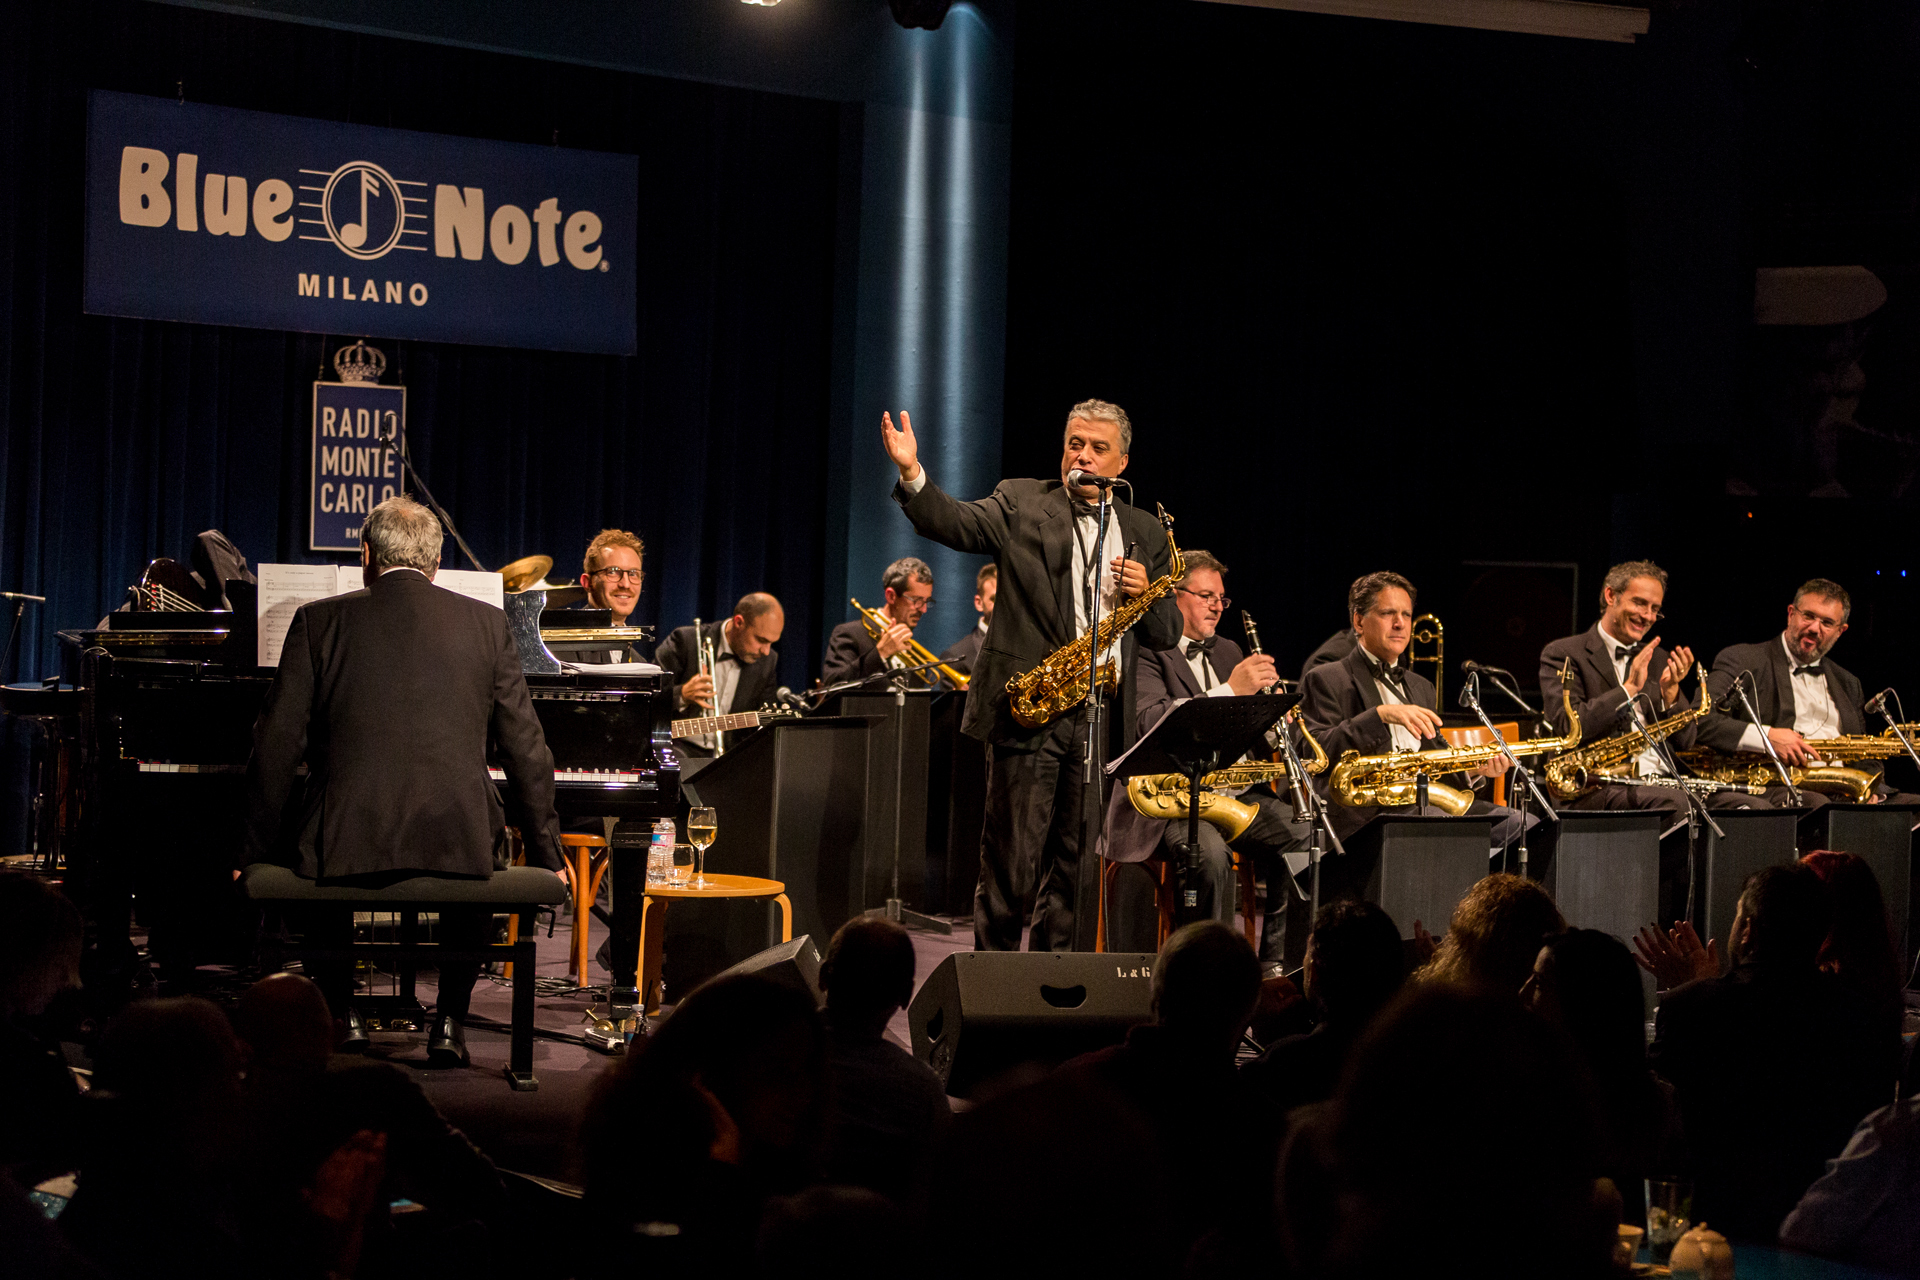 2016_10_15_Nick_Orchestra_Blue_Note_210848_5D3_7855